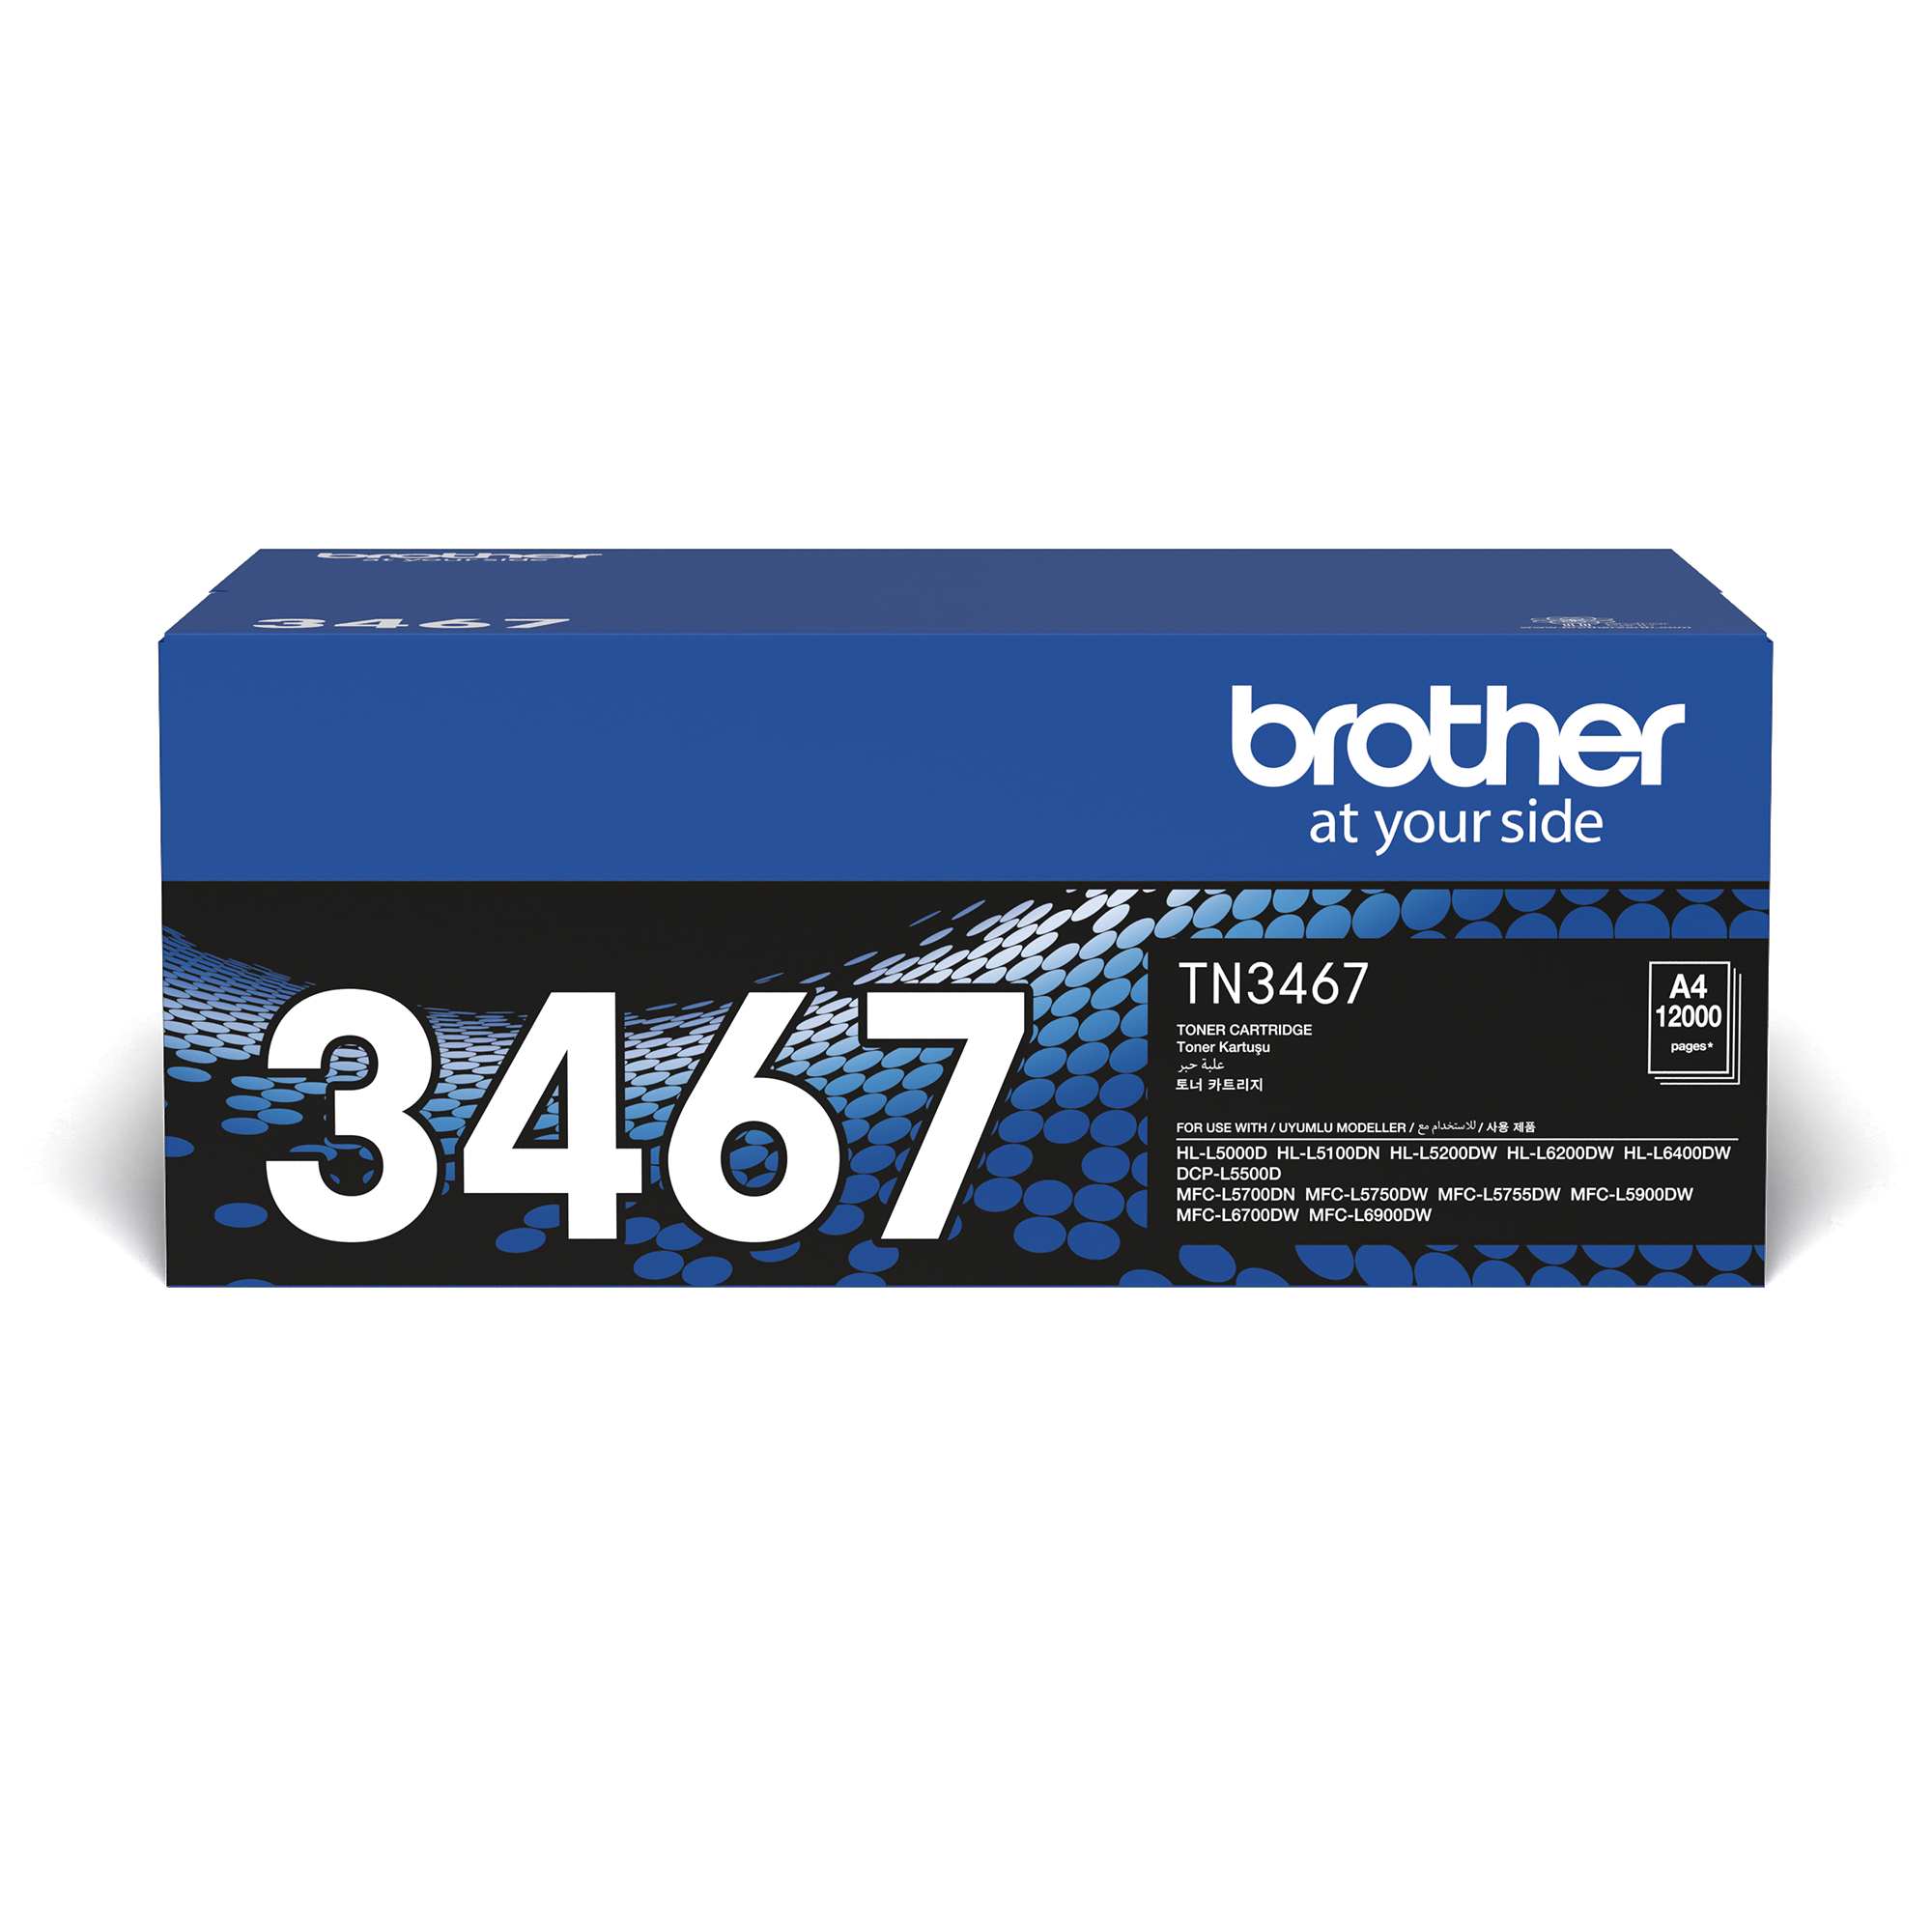 Brother TN3467 TN-3467 Black Toner Cartridge (12,000 Pages)